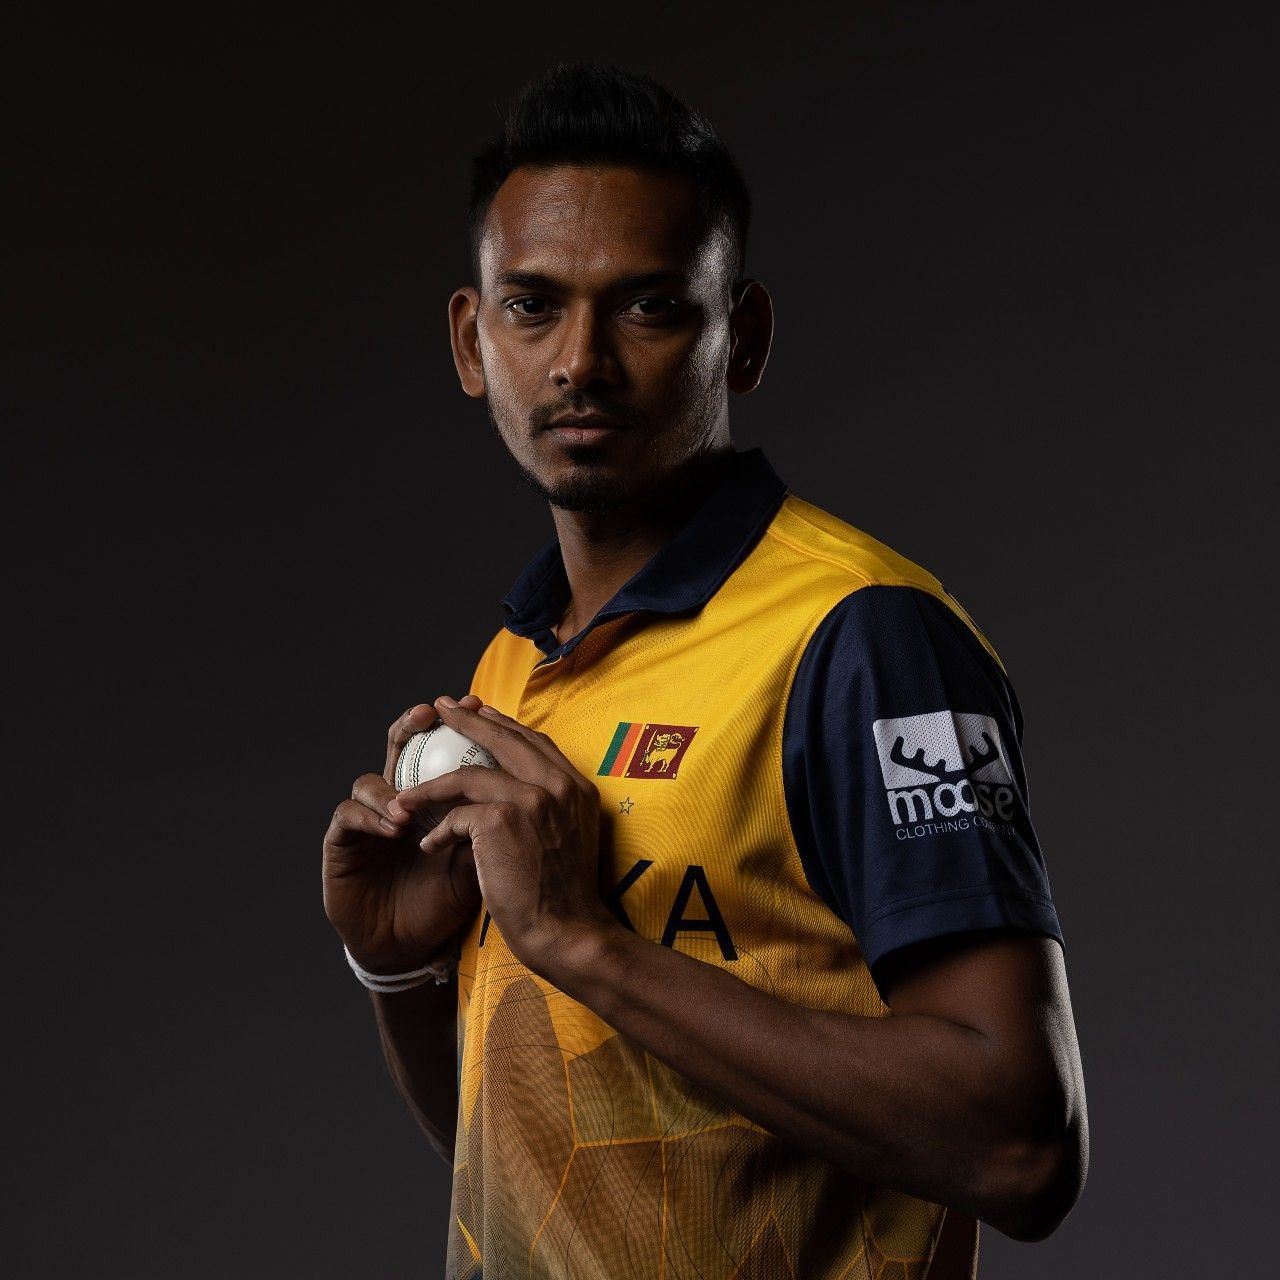 Cool Planet - T20 cricket World Cup 2022 Sri Lanka jersey now